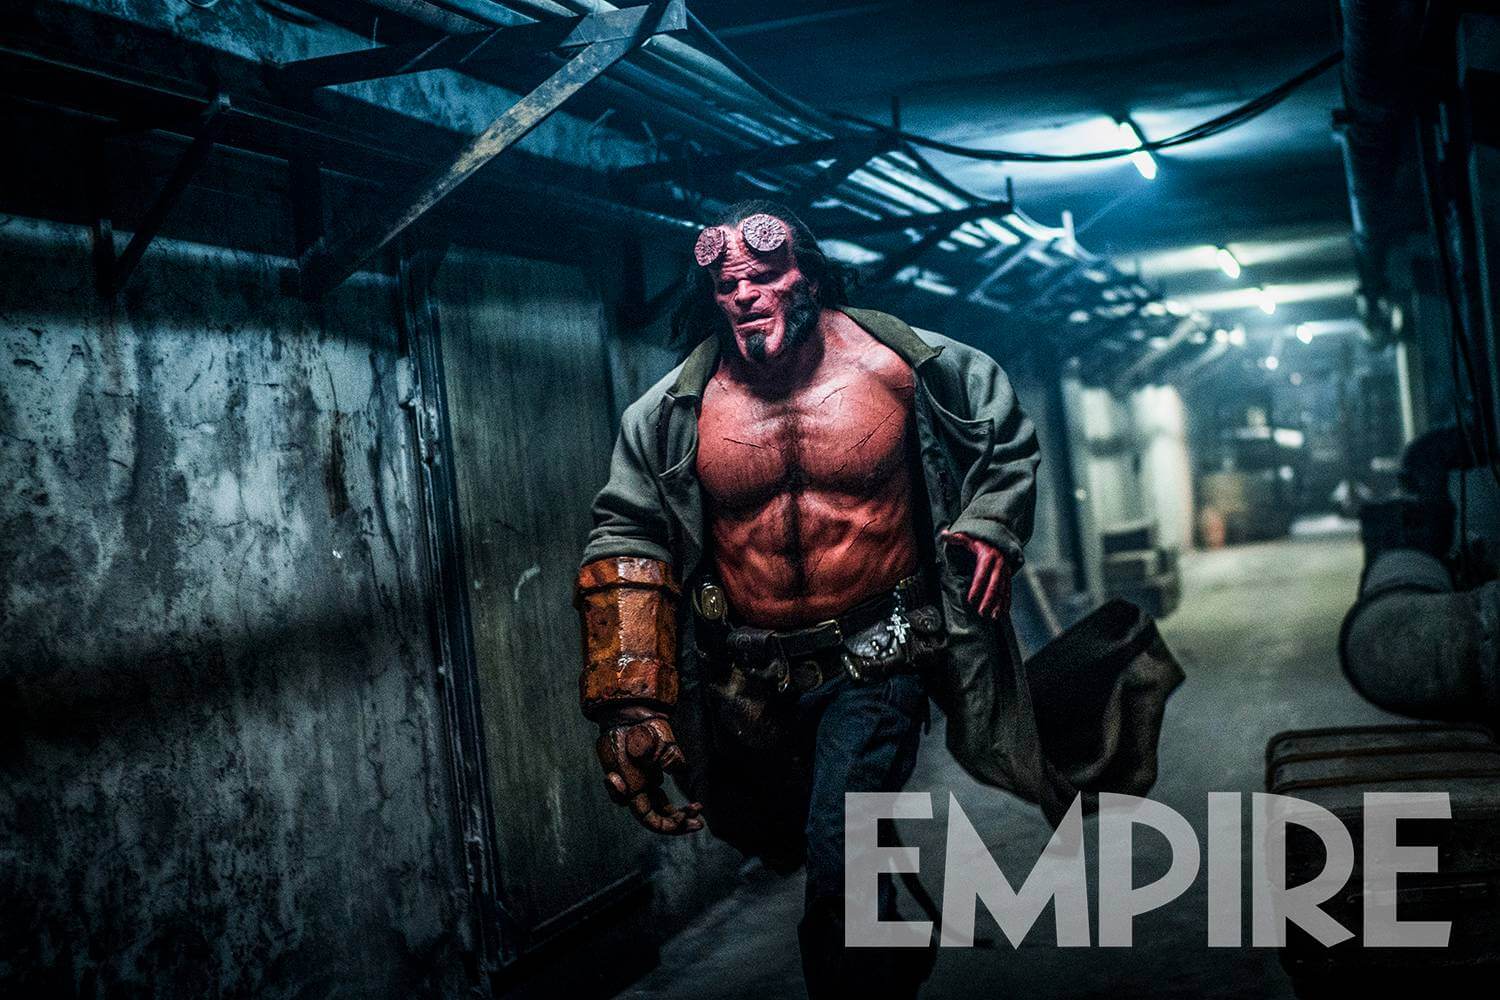 Hellboy Image Gives a Look-1